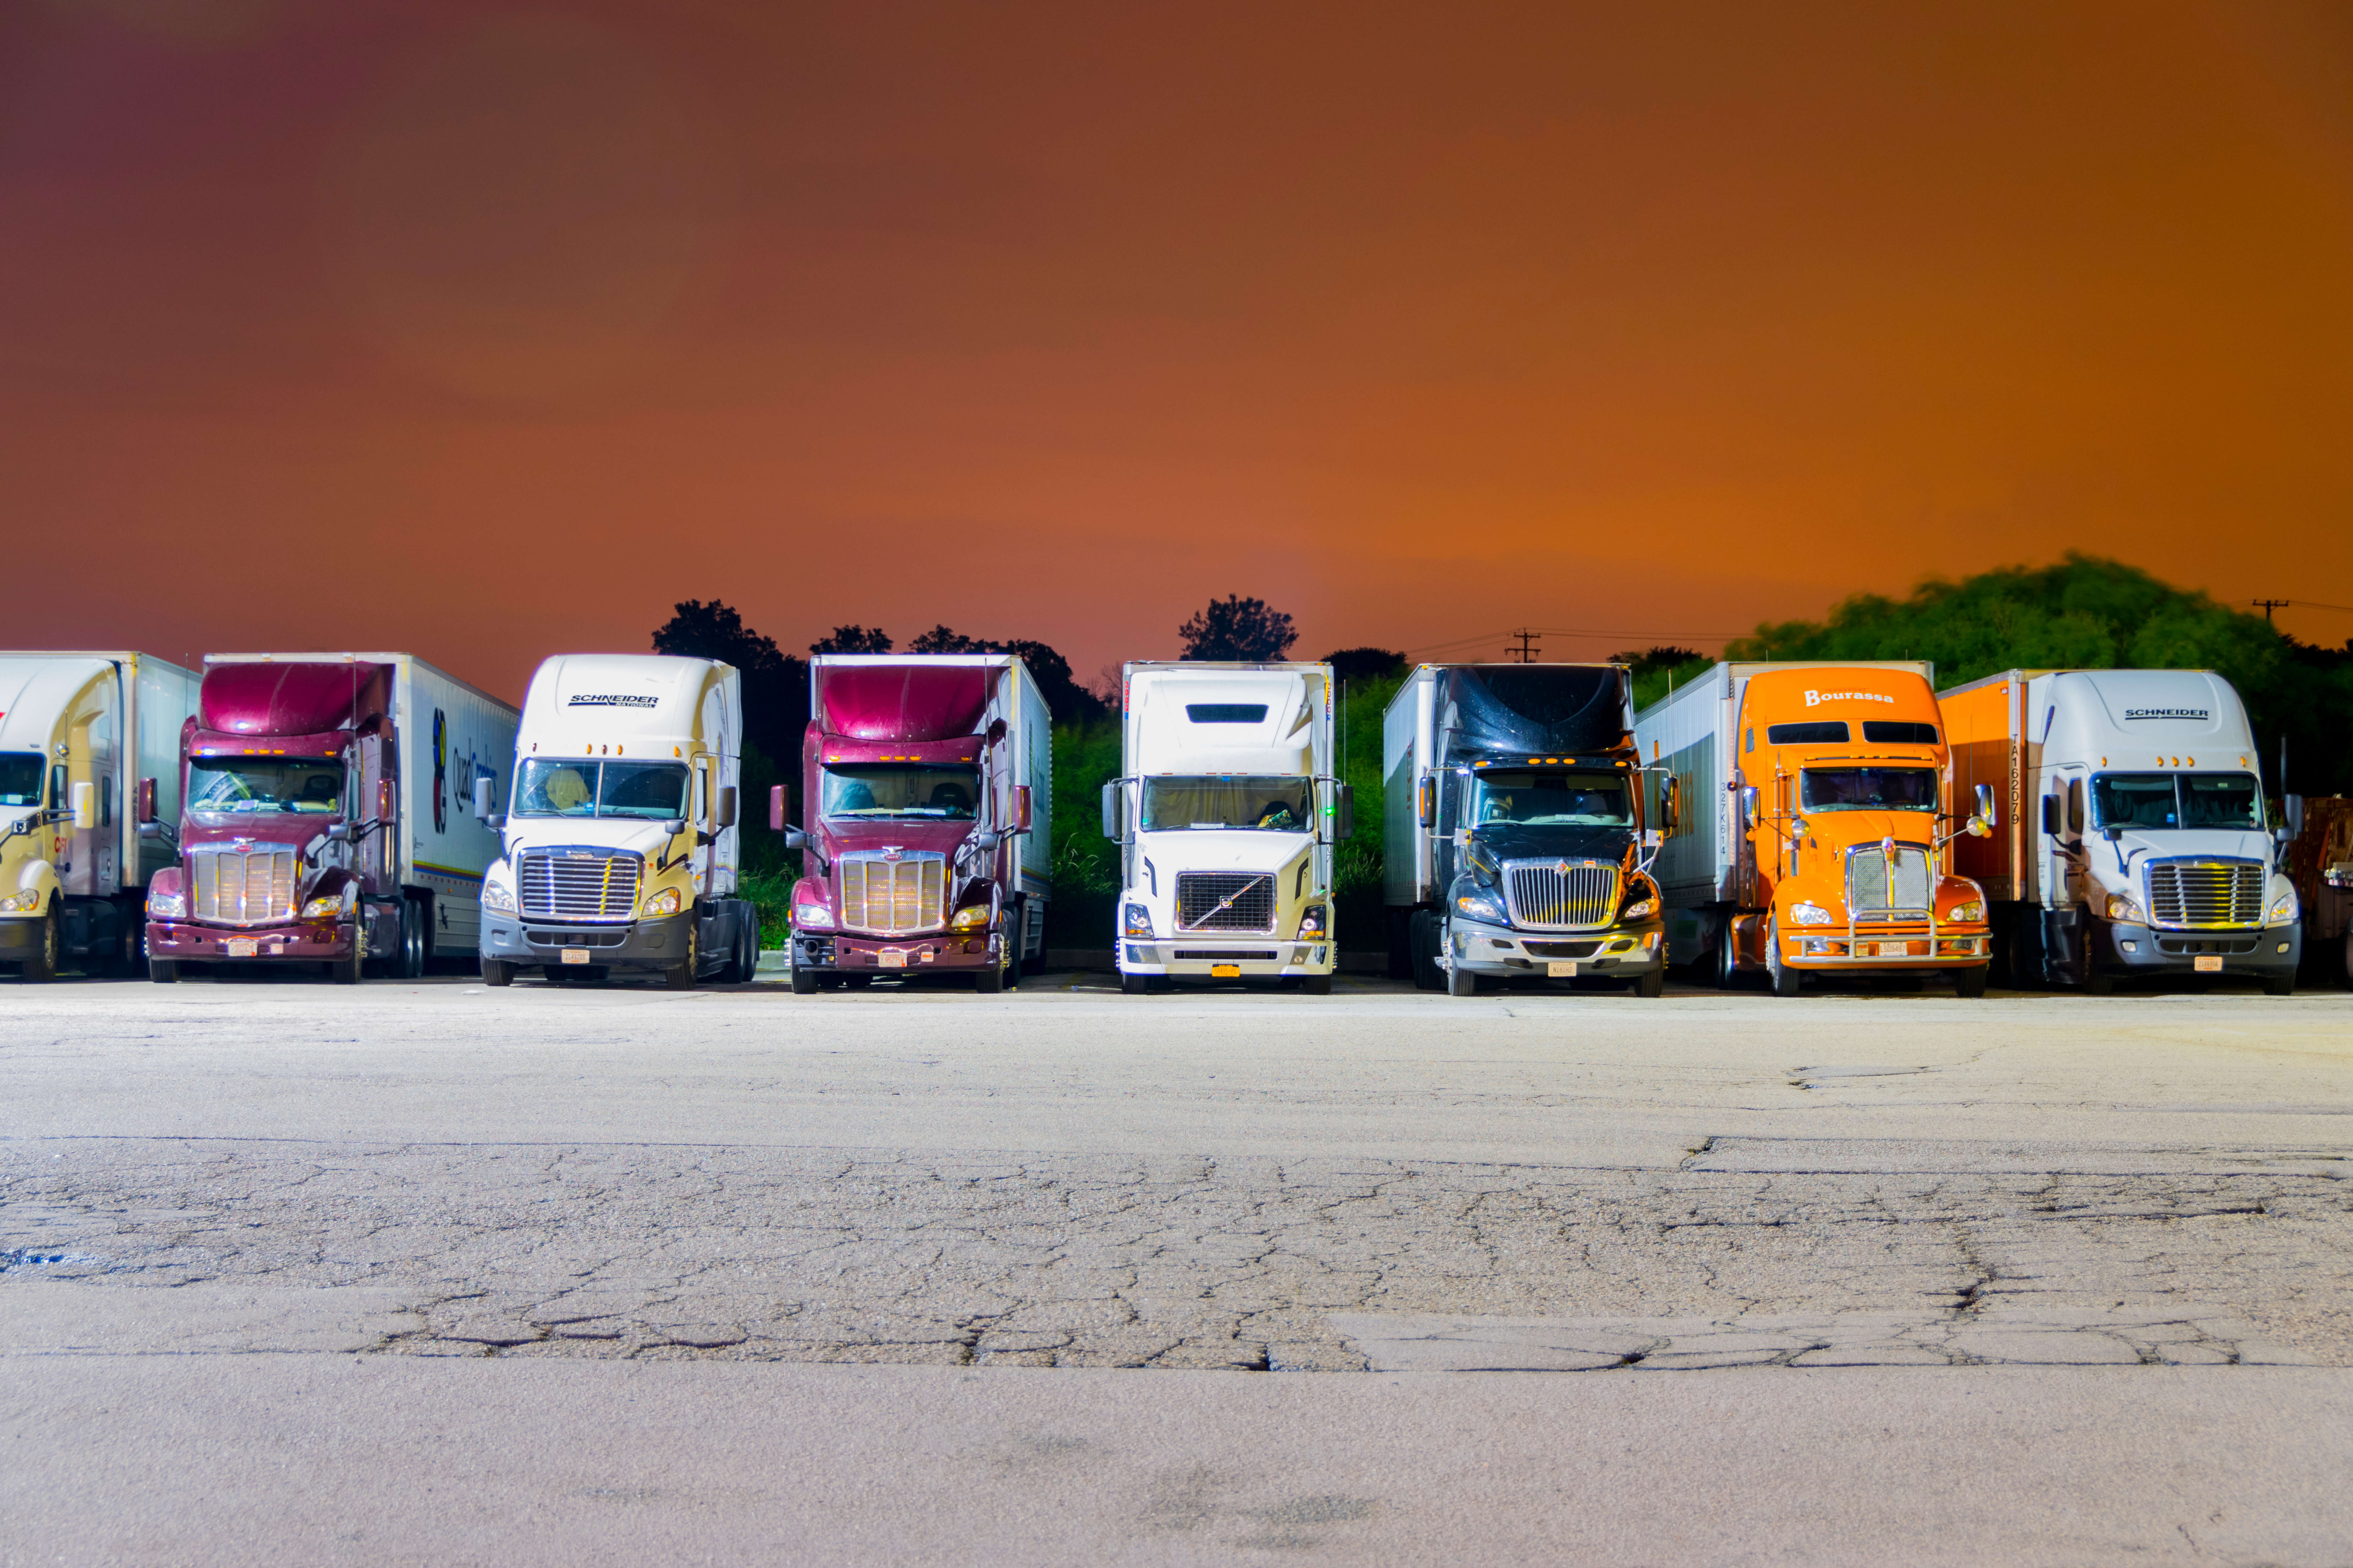 nighttime driving tips for truckers 3